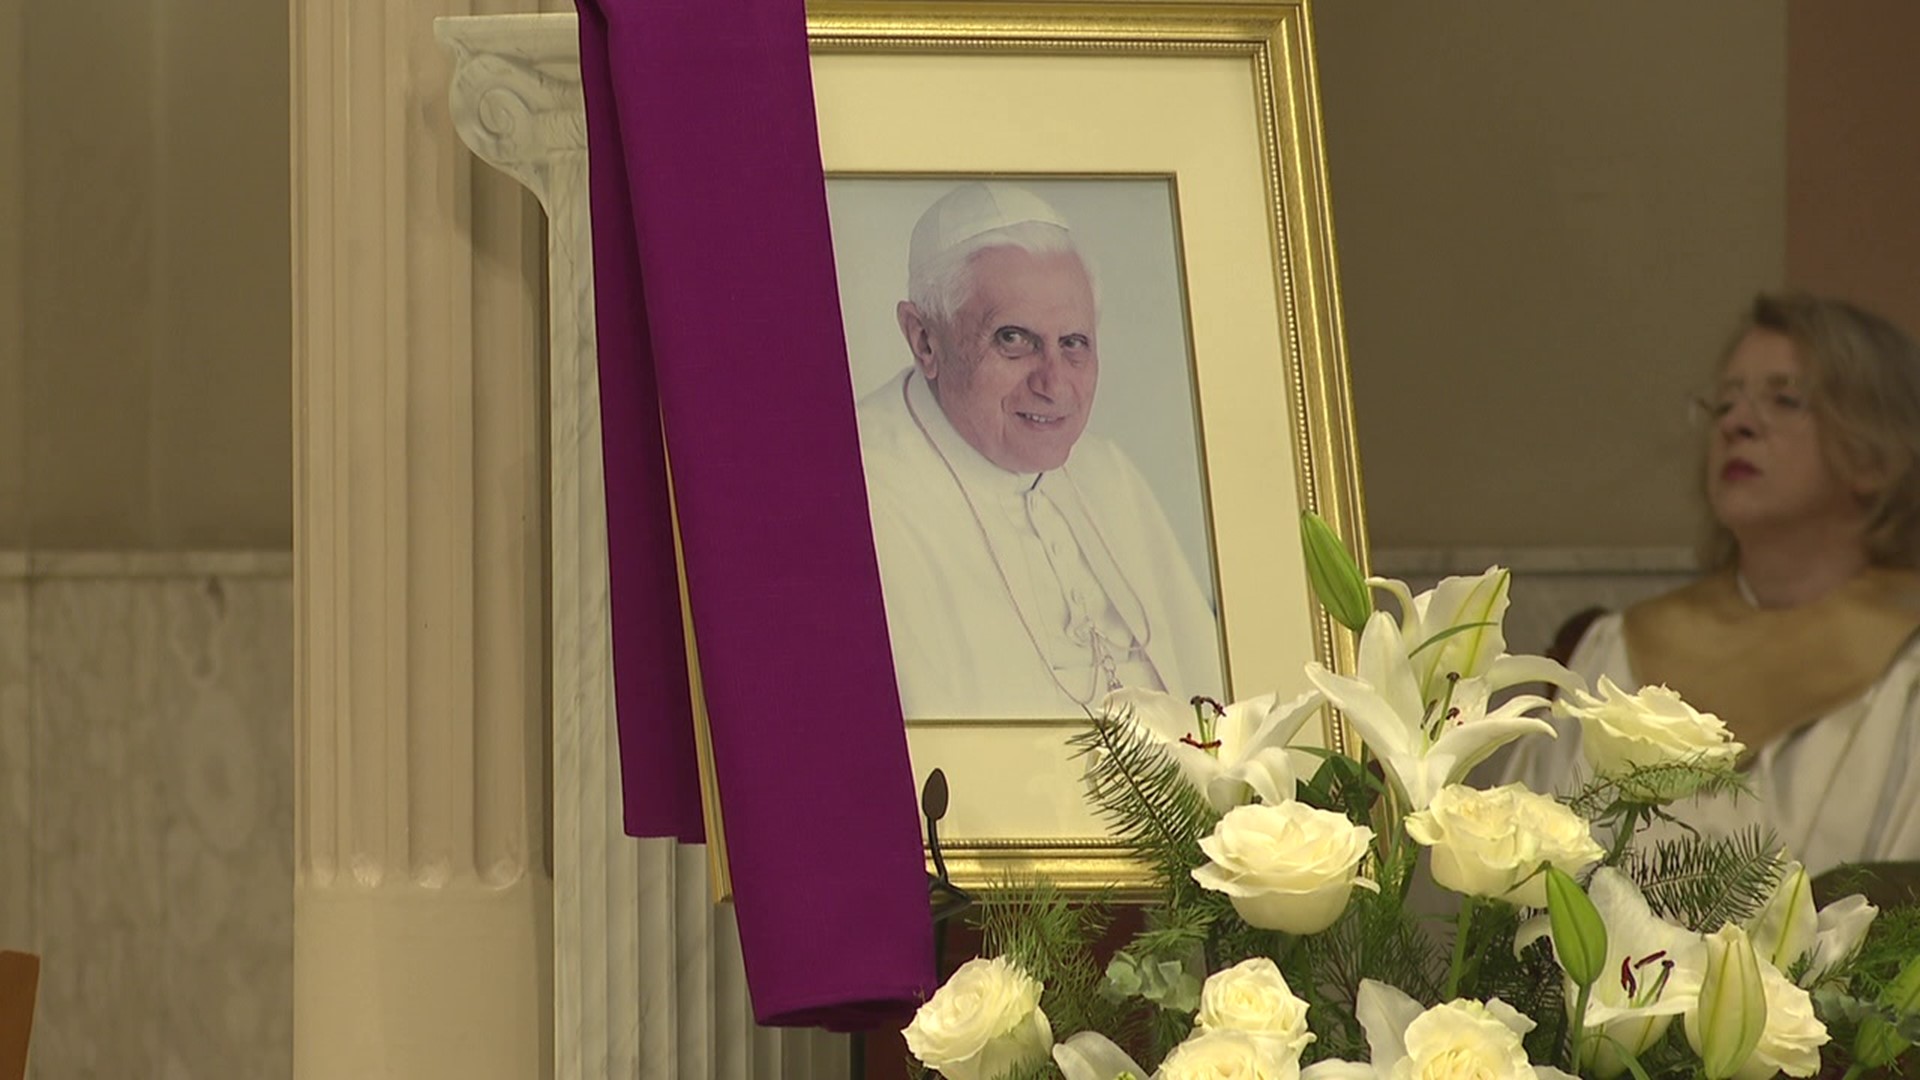 The former pope passed away over the weekend, and the Diocese of Scranton hosted this memorial mass ahead of the funeral at the Vatican.